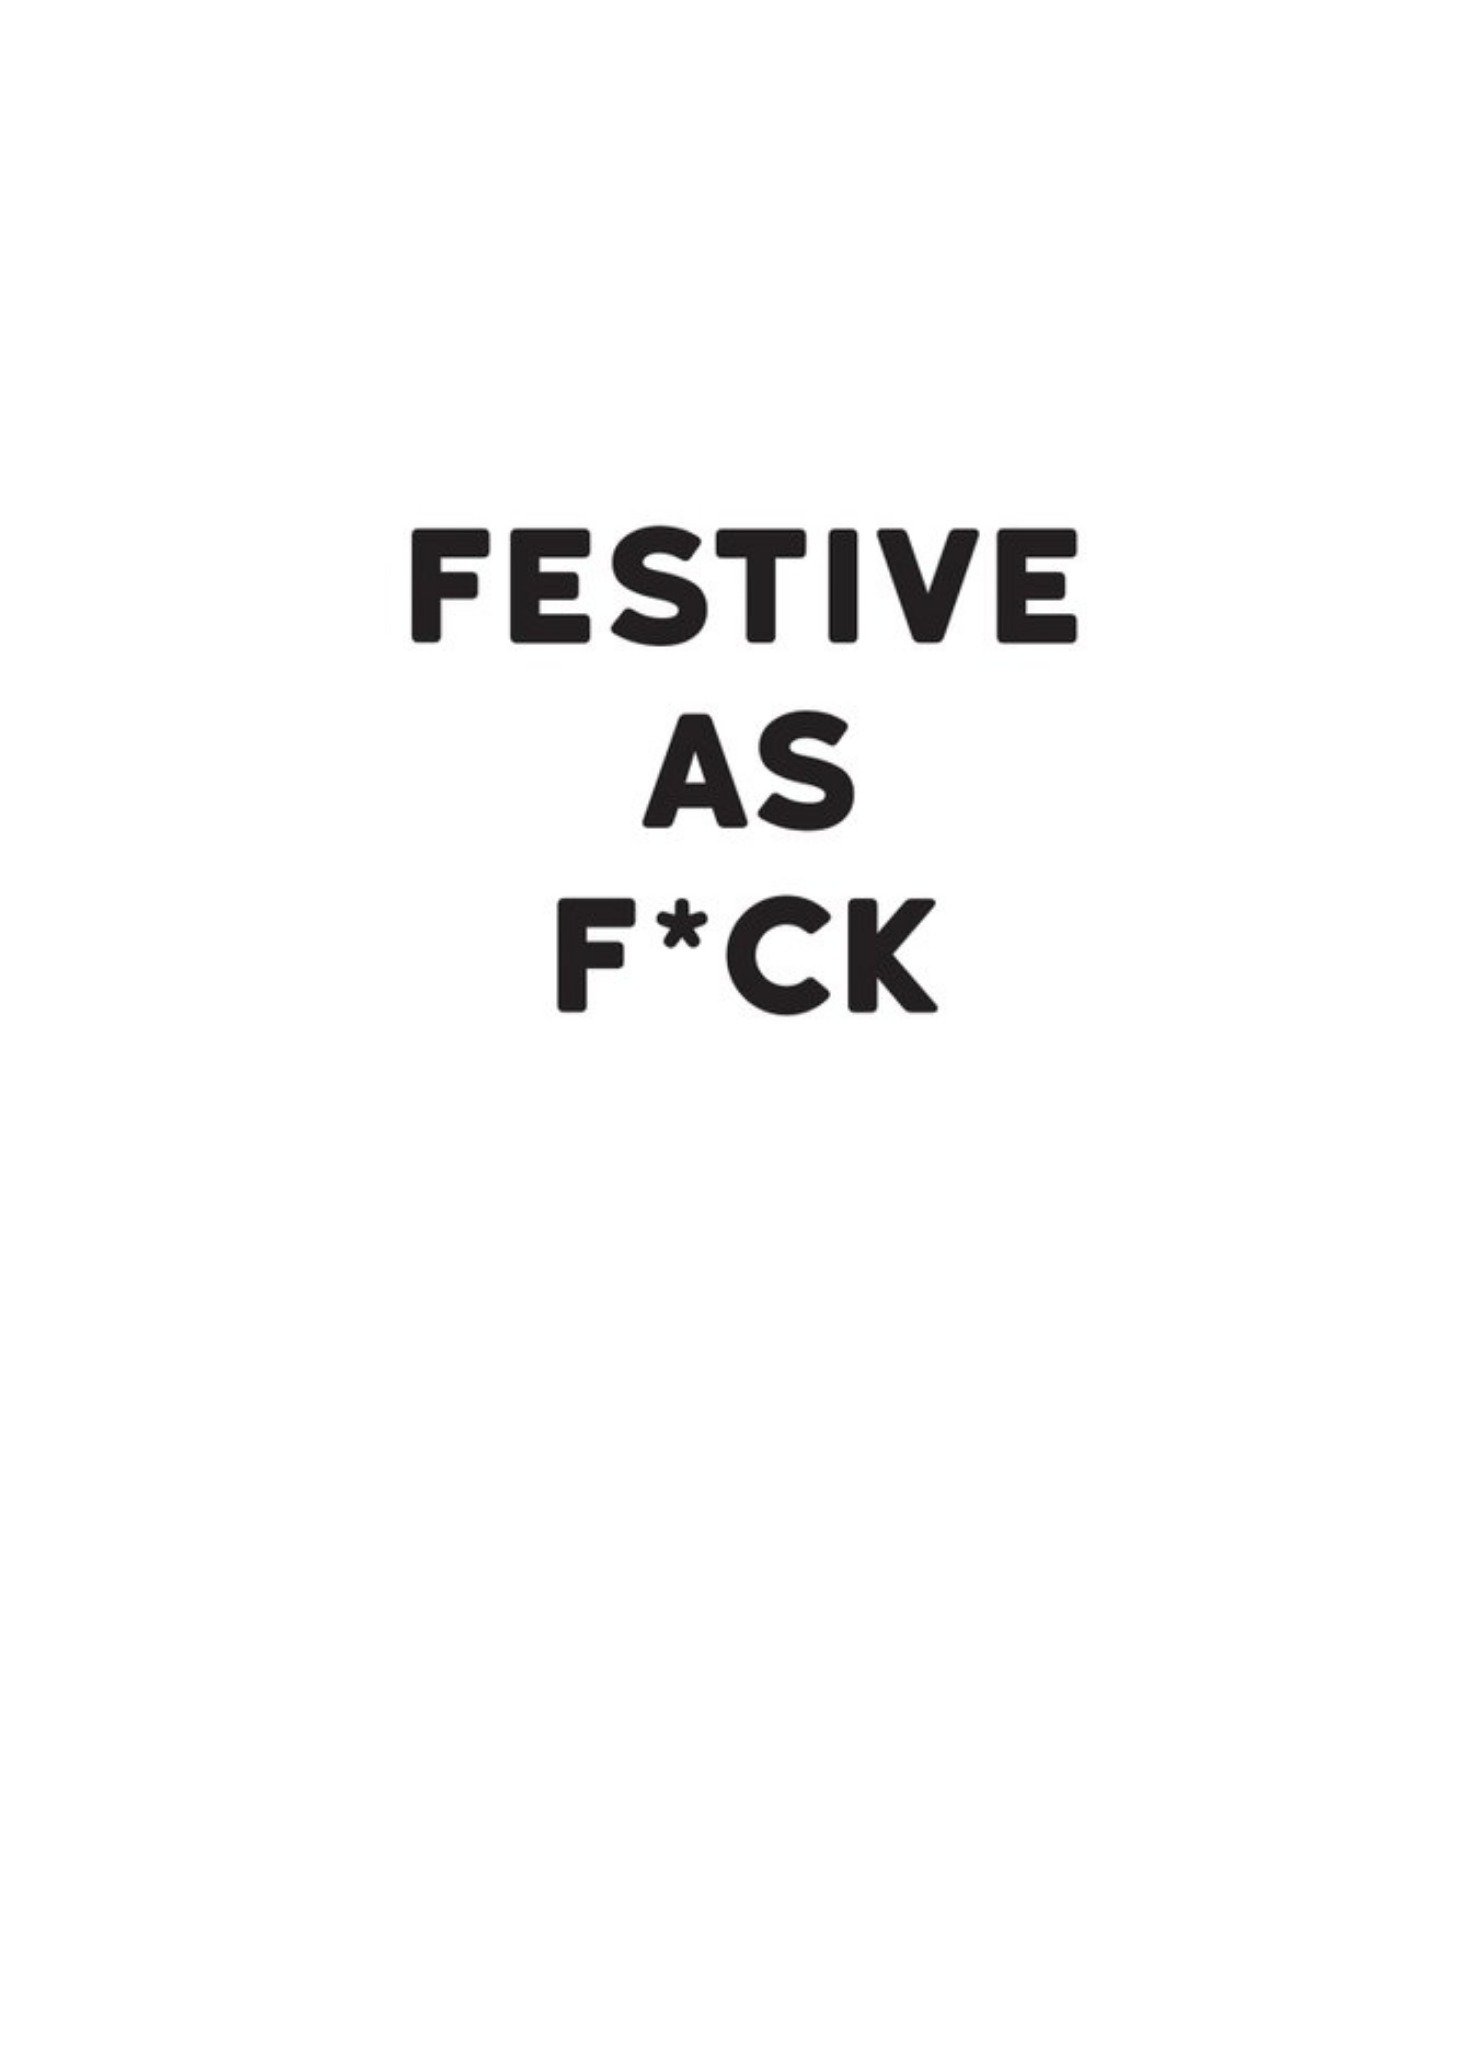 Moonpig Rude Funny Typographical Festive Christmas Card, Large